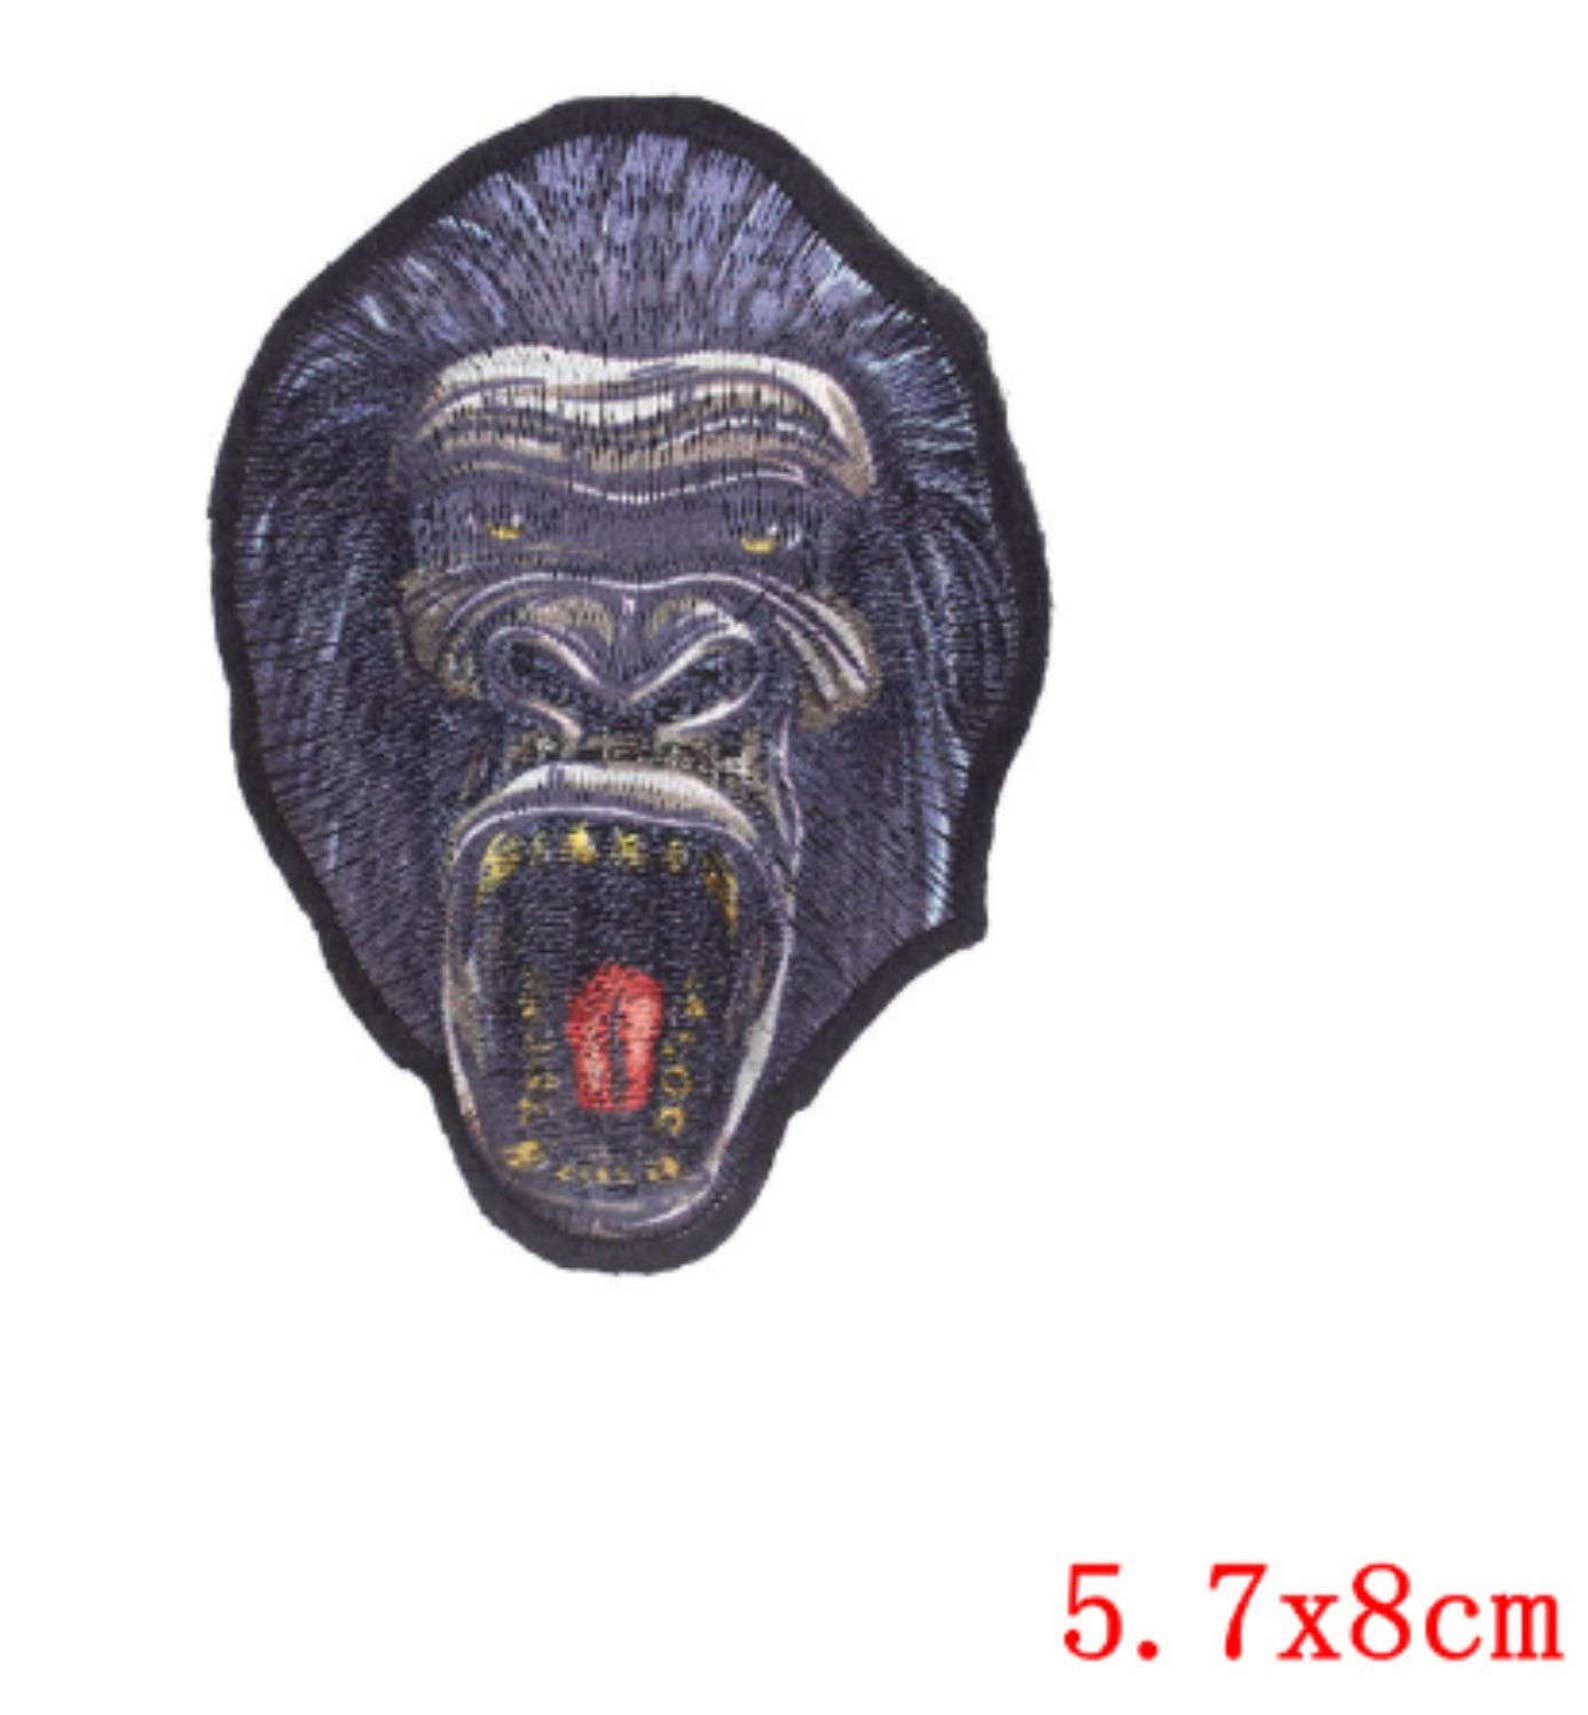 Monkey Gorilla Motif Sew On Embroidered Patch Clothes Etsy